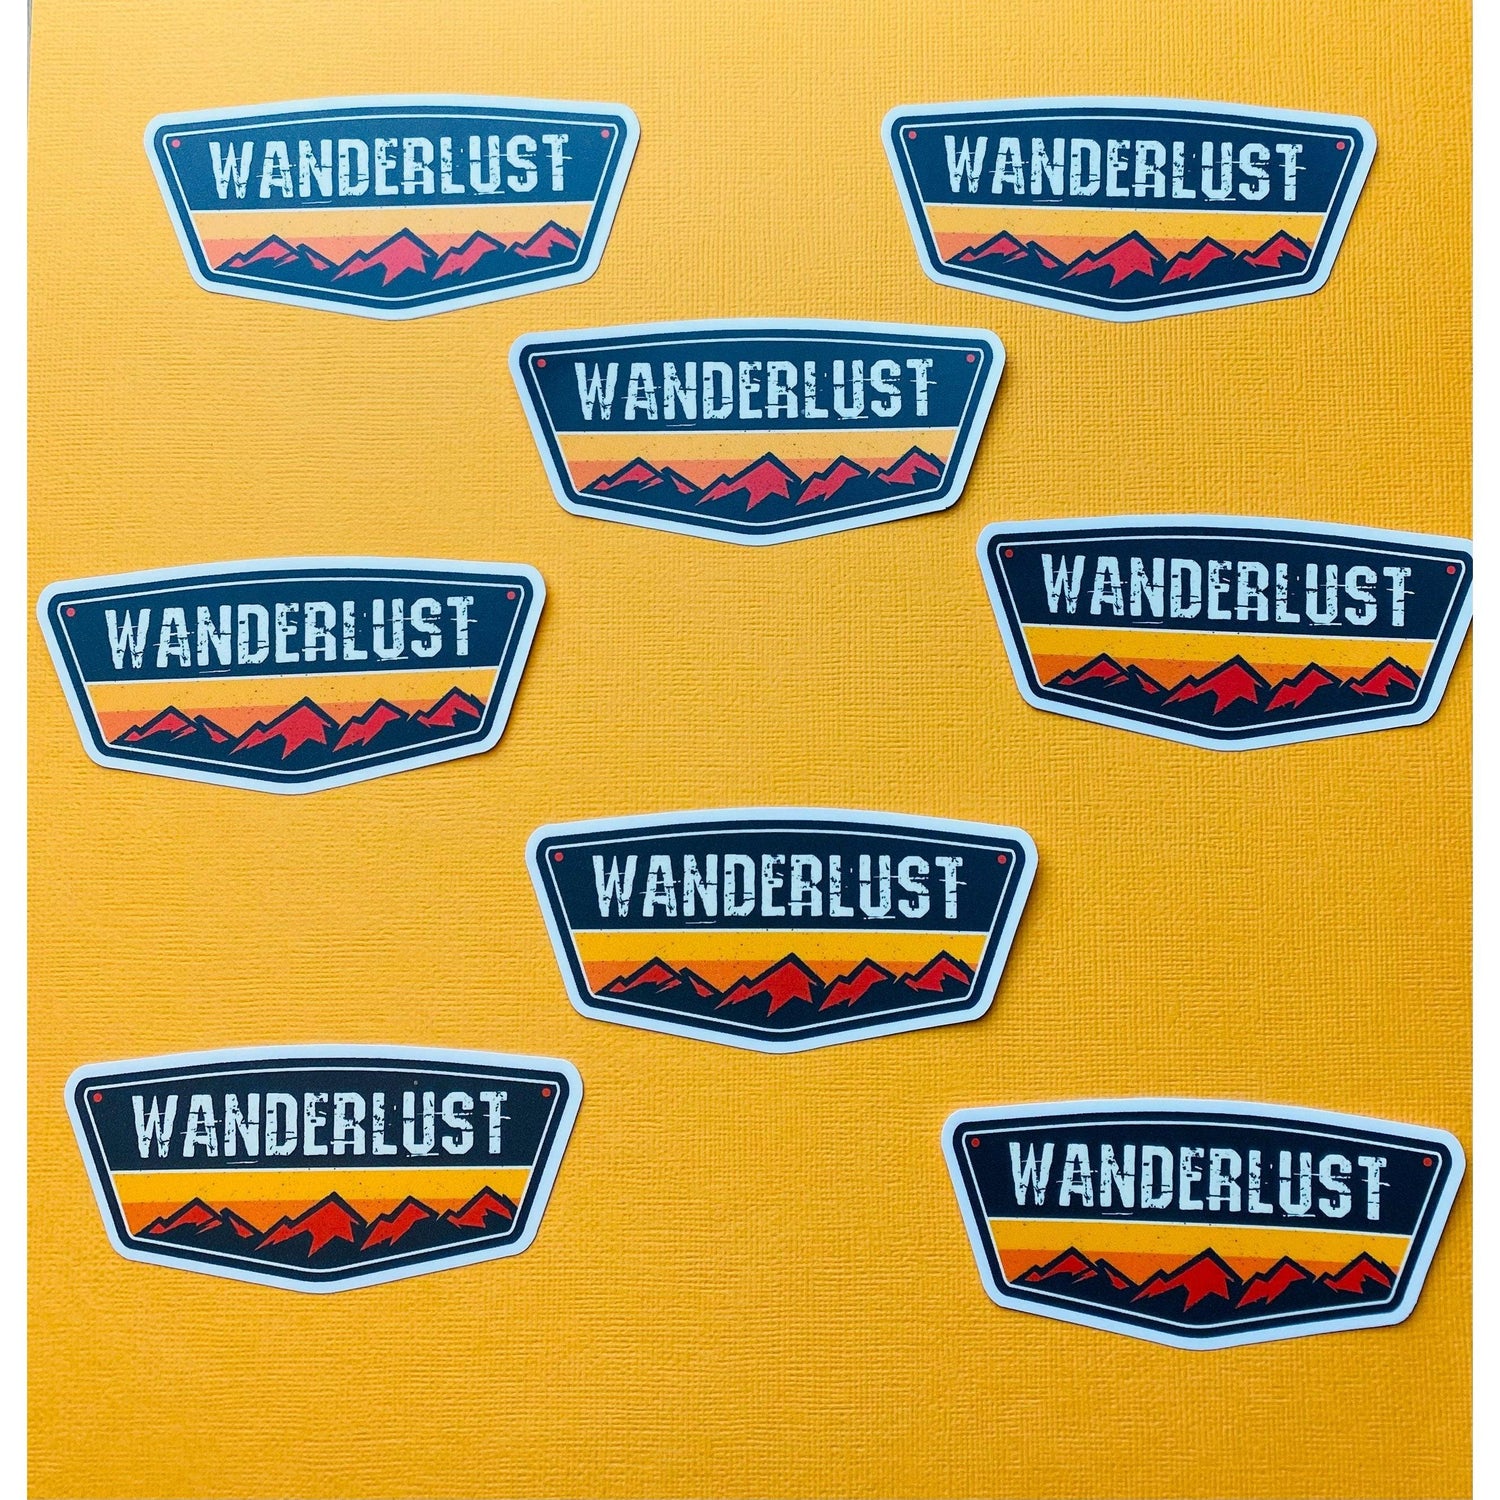 Wanderlust Sticker for Hikers Hiking Camping Outdoor Life Mountains Wilderness Living - Ottos Grotto :: Stickers For Your Stuff